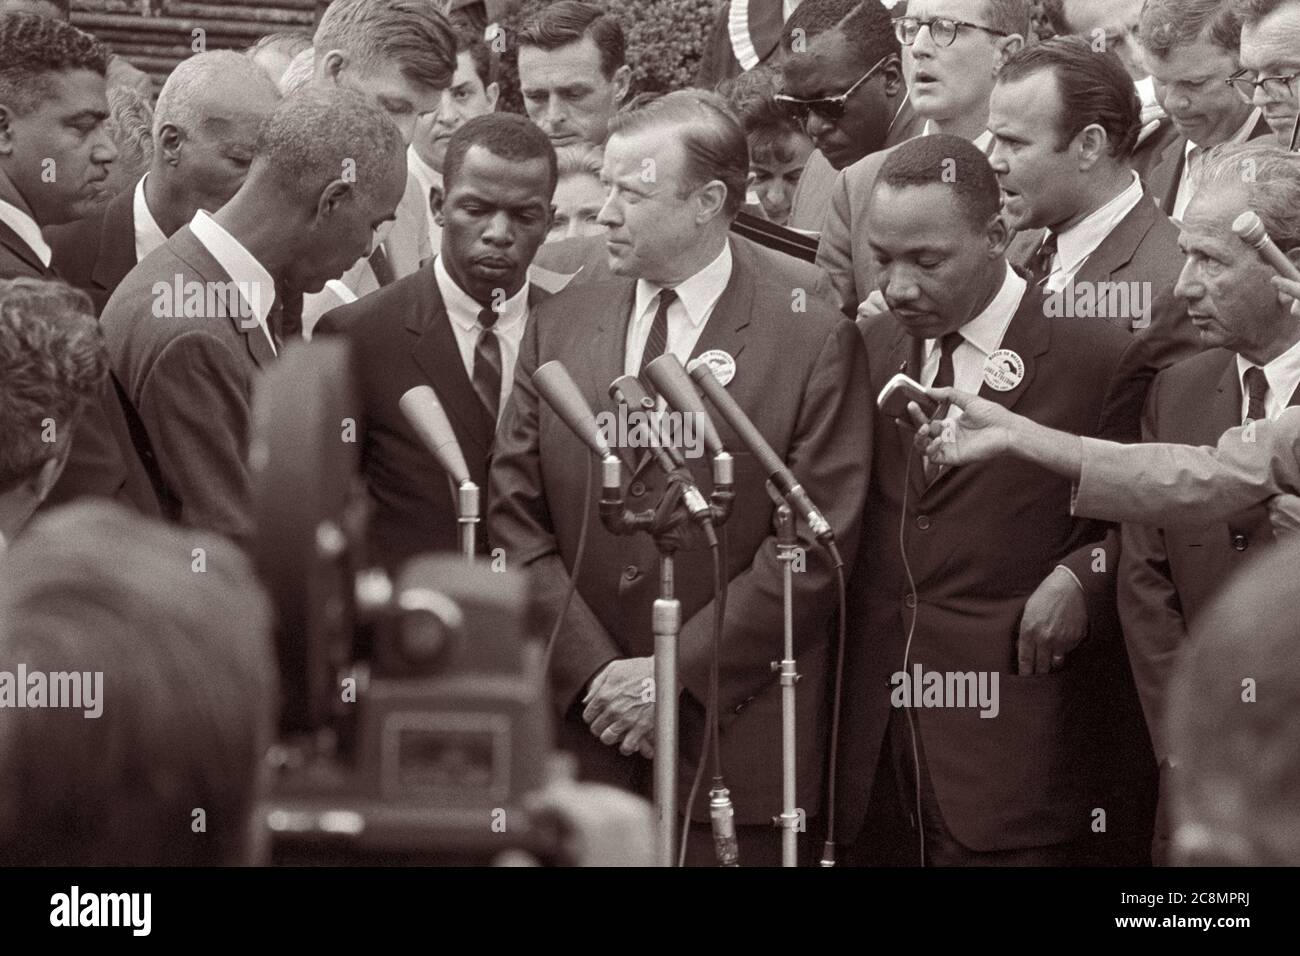 Civil rights leaders, including Martin Luther King (SCLC), John Lewis (SNCC), and Roy Wilkins (NAACP), meeting with reporters following a meeting with President John F. Kennedy after the March on Washington, D.C., August 28, 1963. Stock Photo